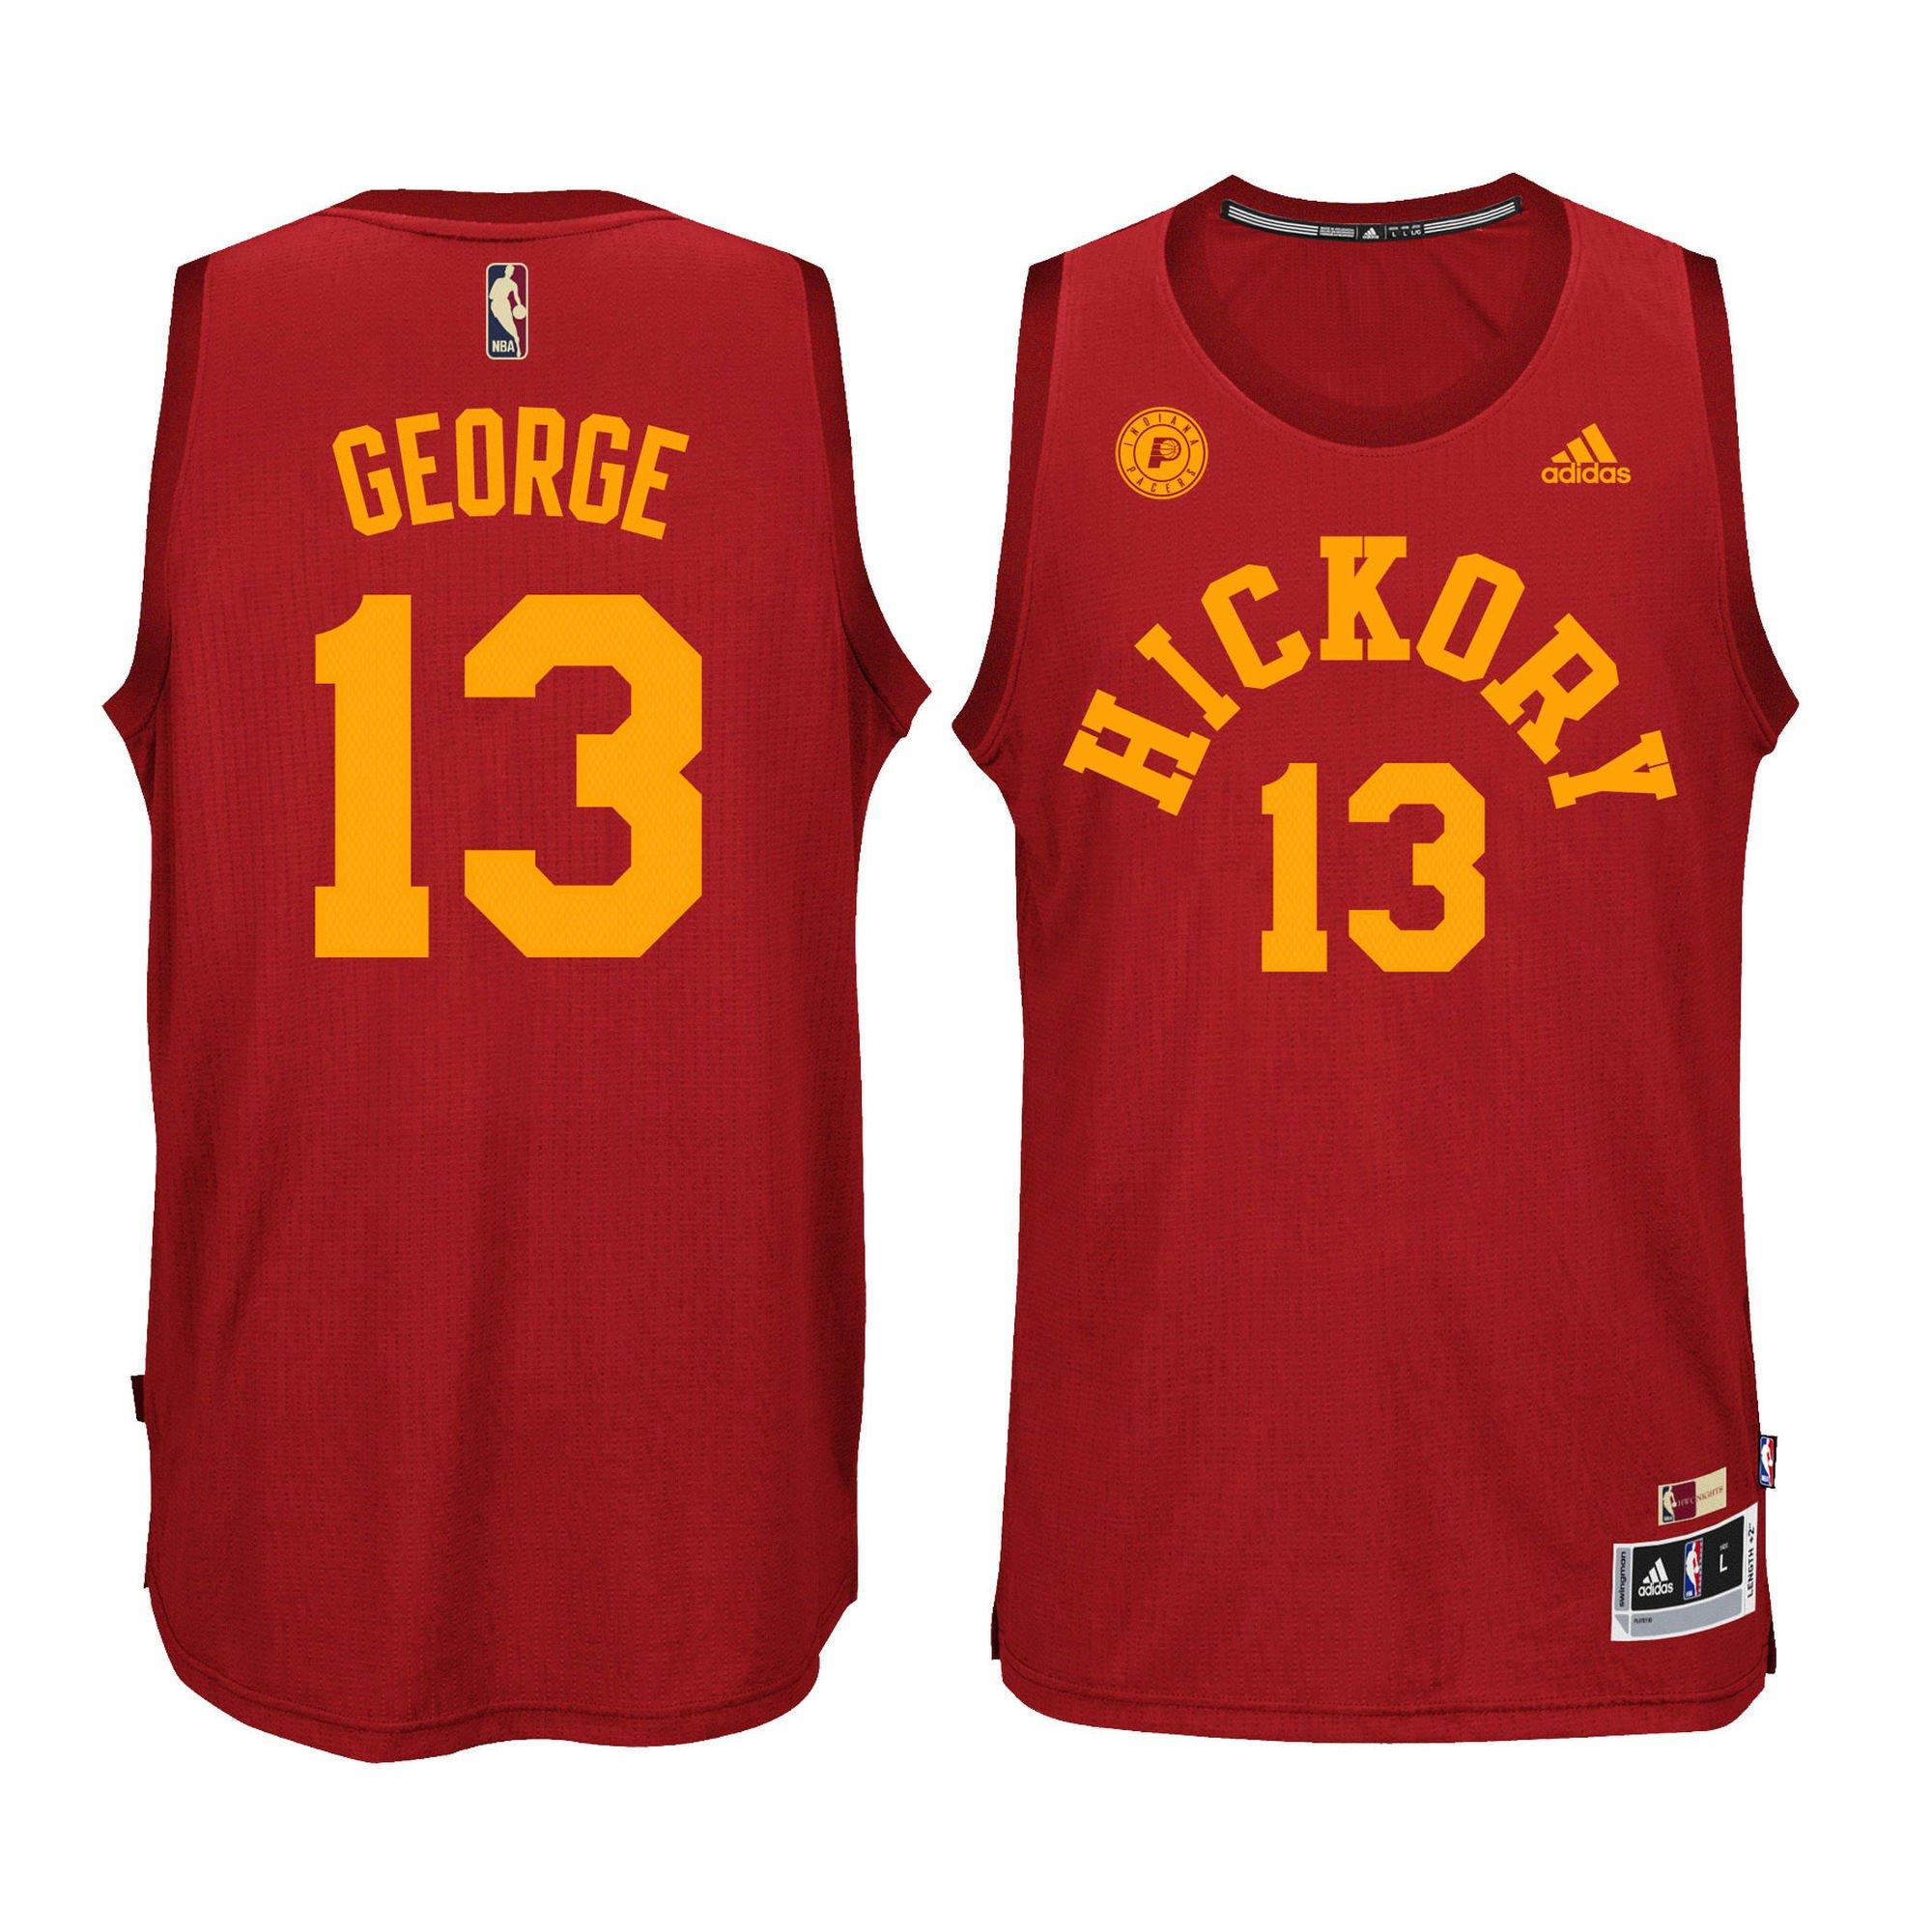 hickory paul george jersey